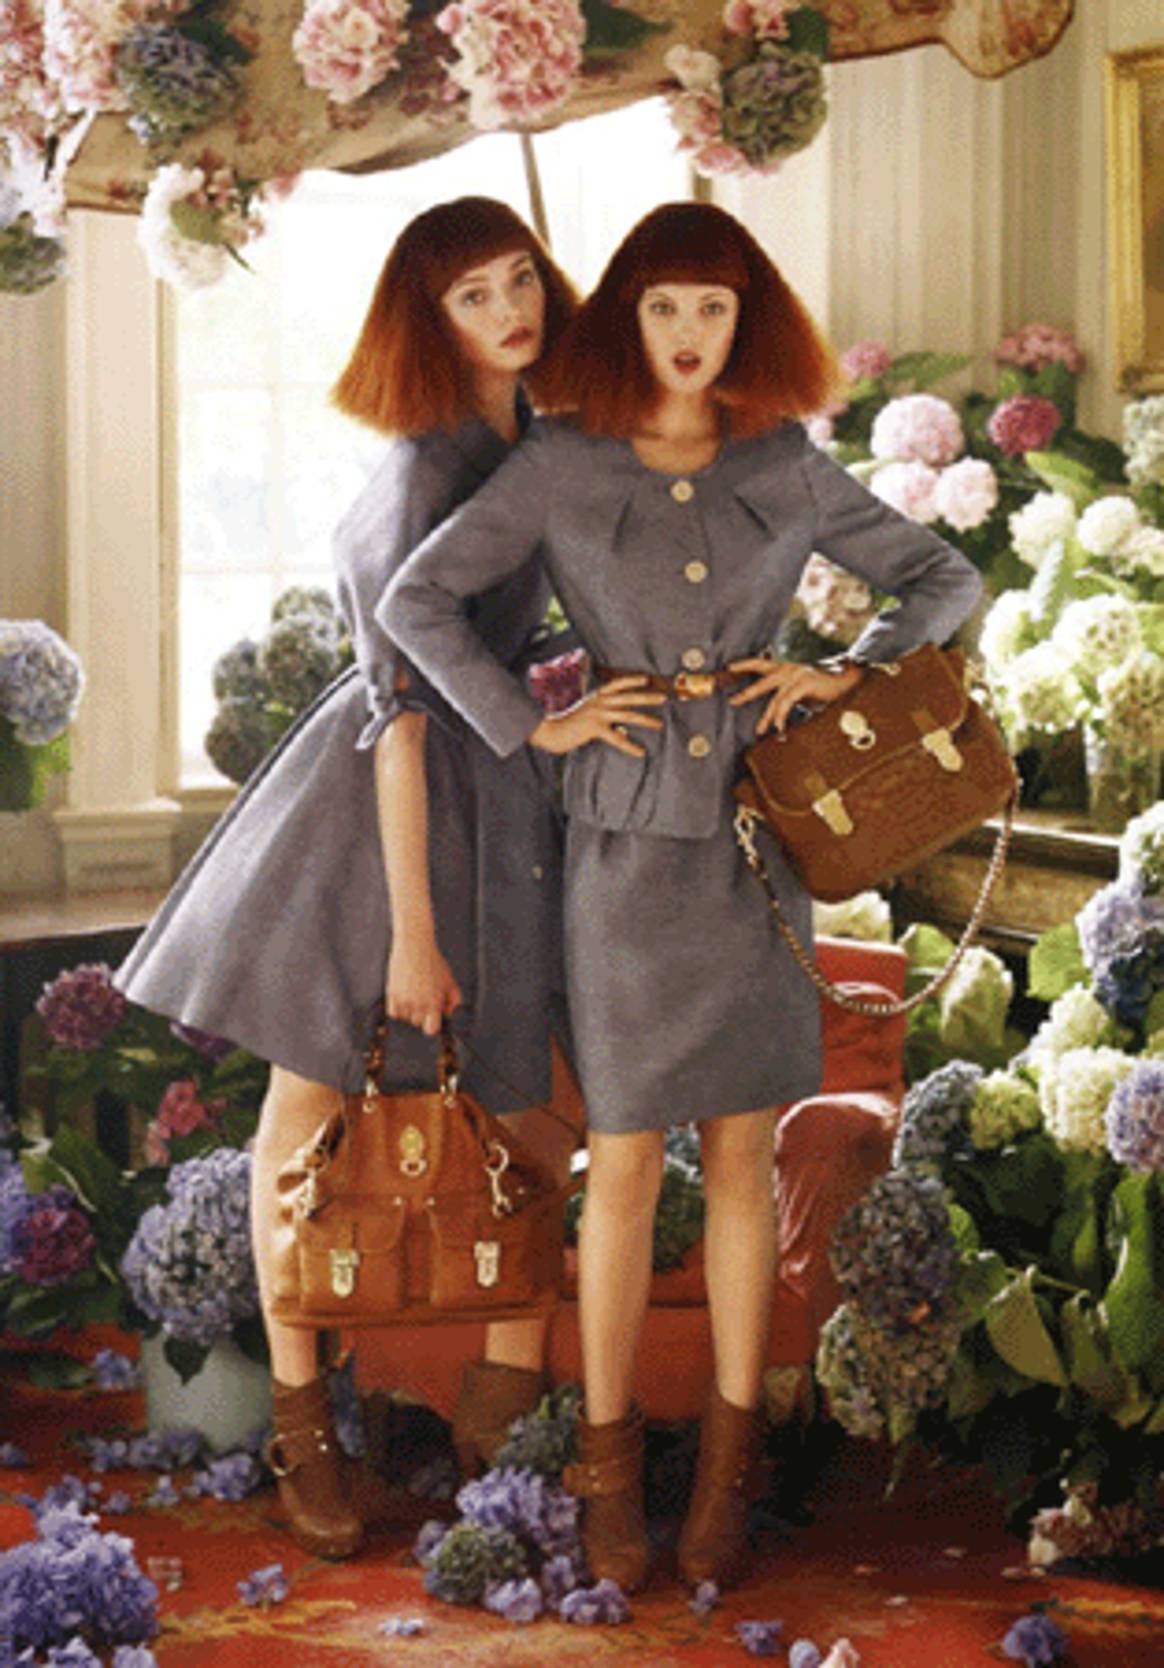 Blame the taxes: Mulberry won´t expand in the UK